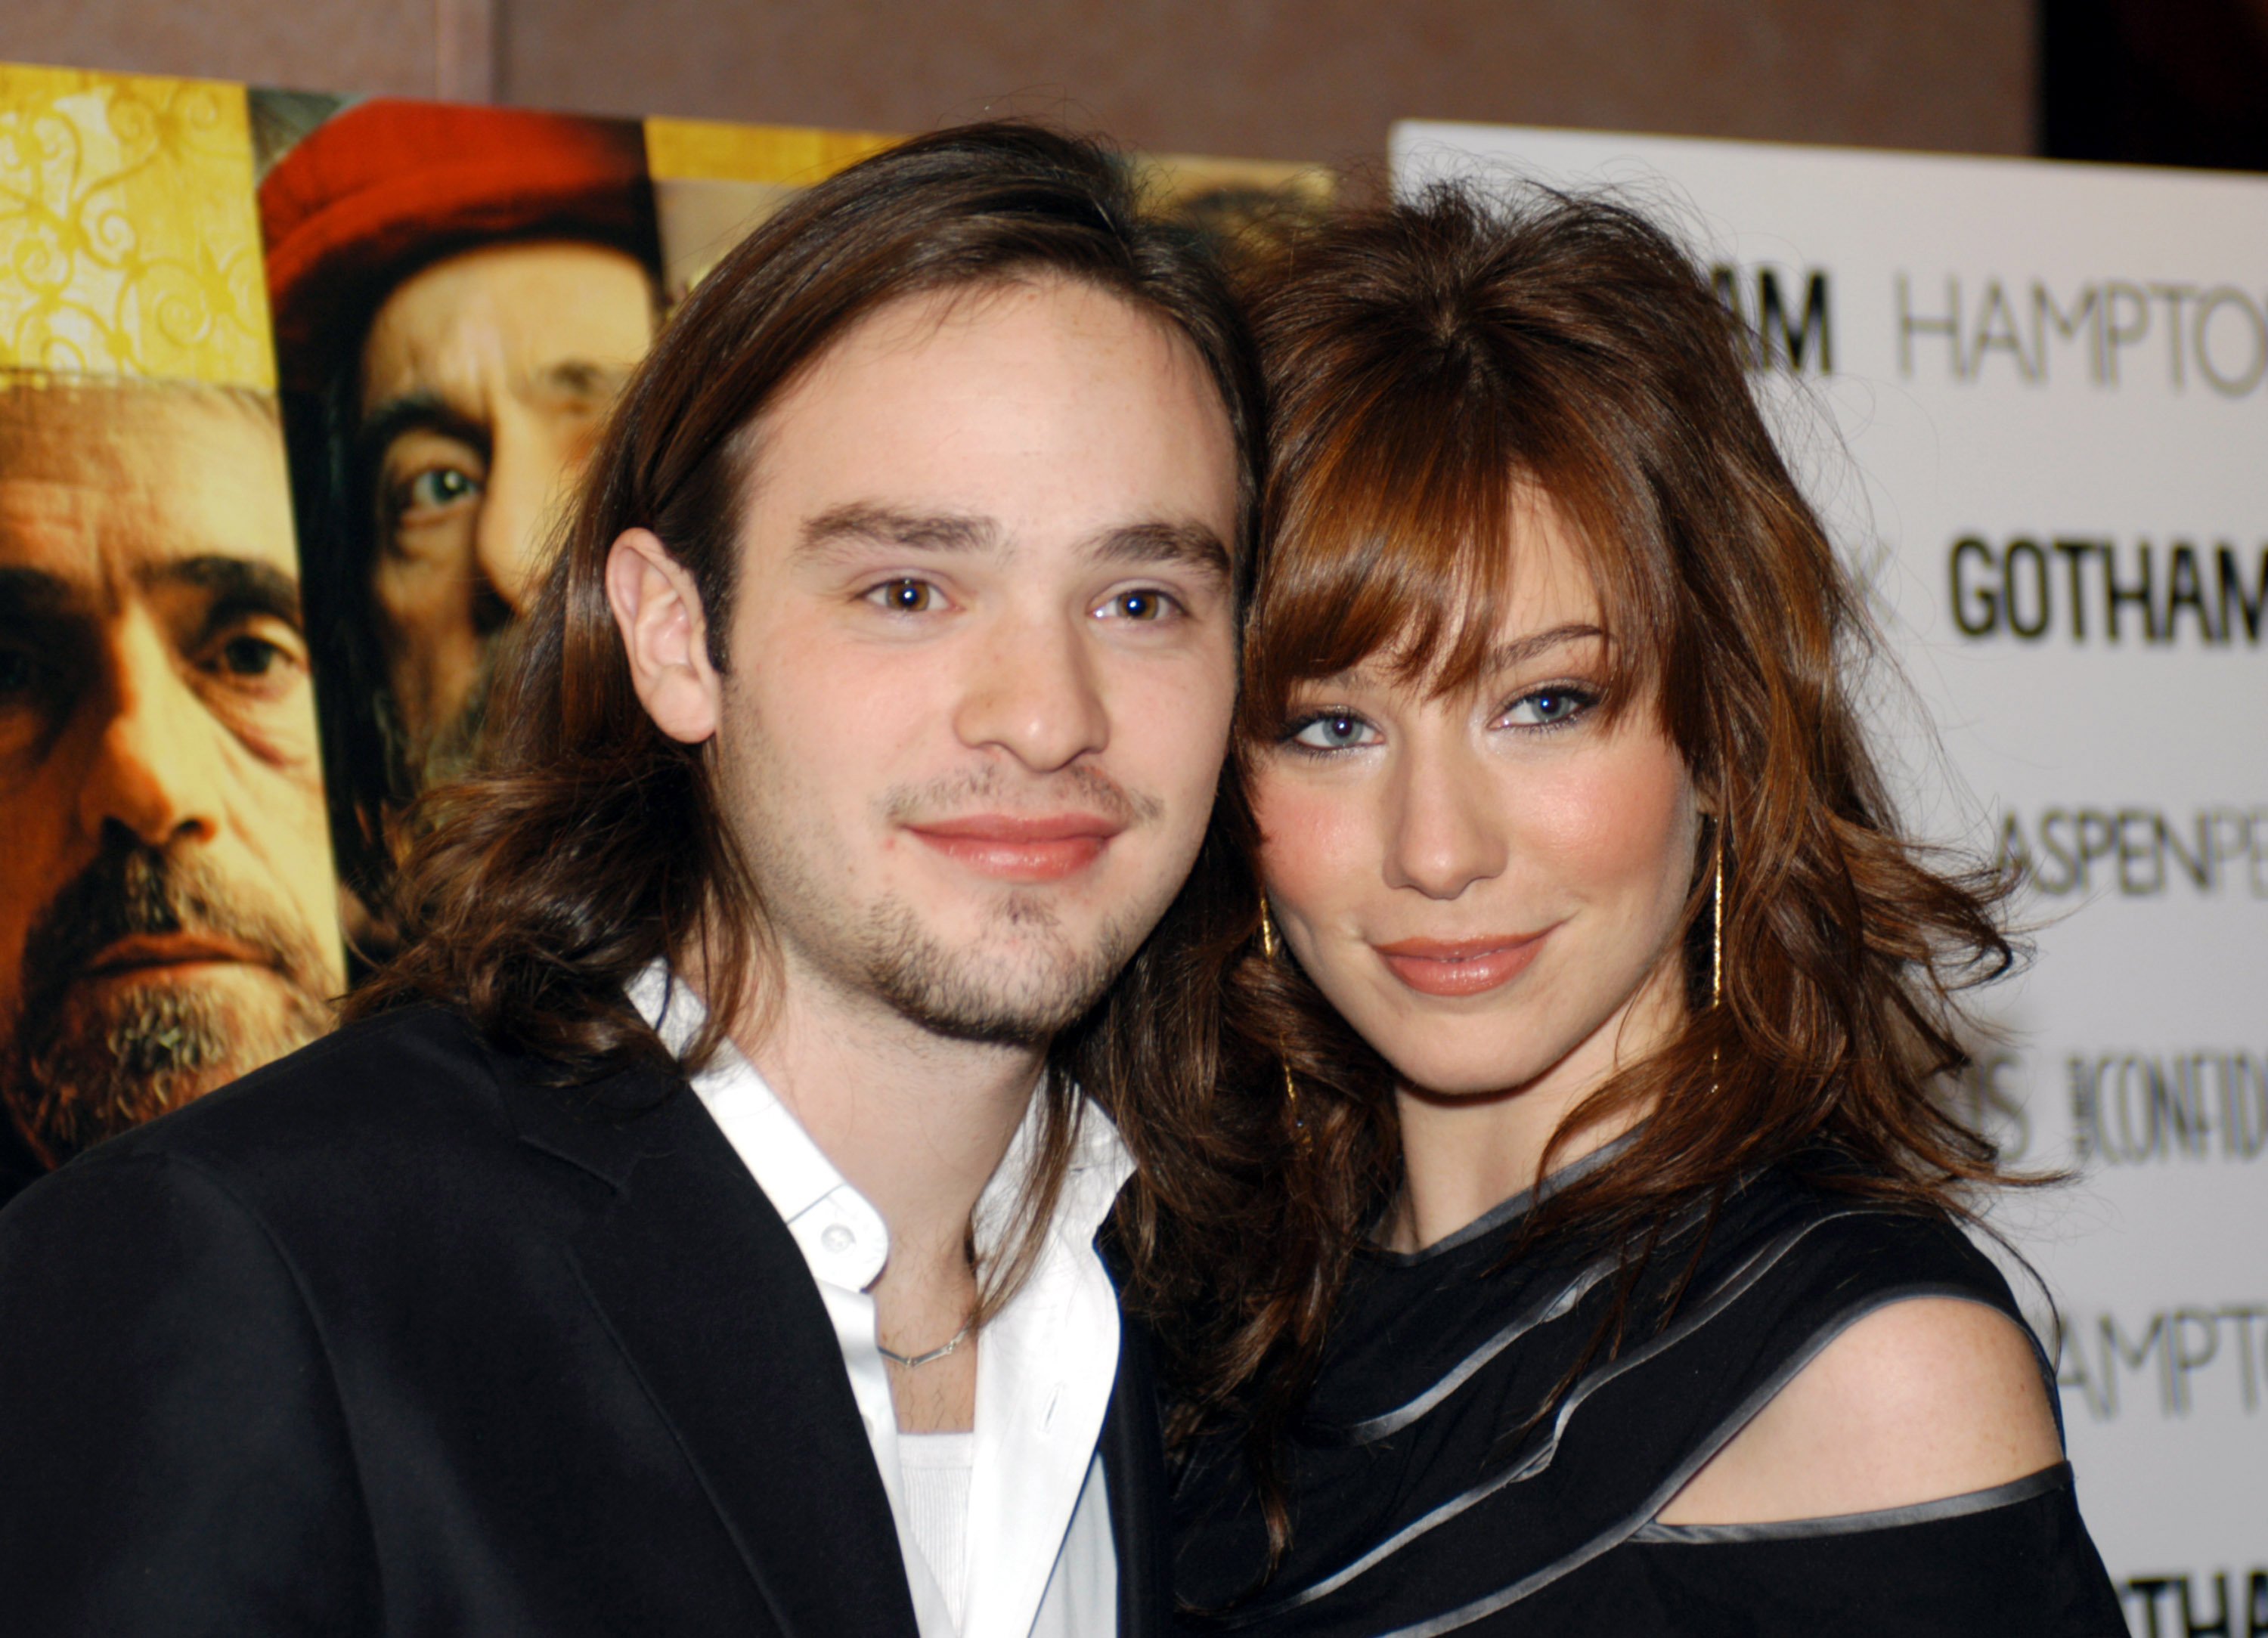 Charlie Cox and Lynn Collins at the premiere party for "The Merchant of Venice" on December 5, 2004 | Source: Getty Images